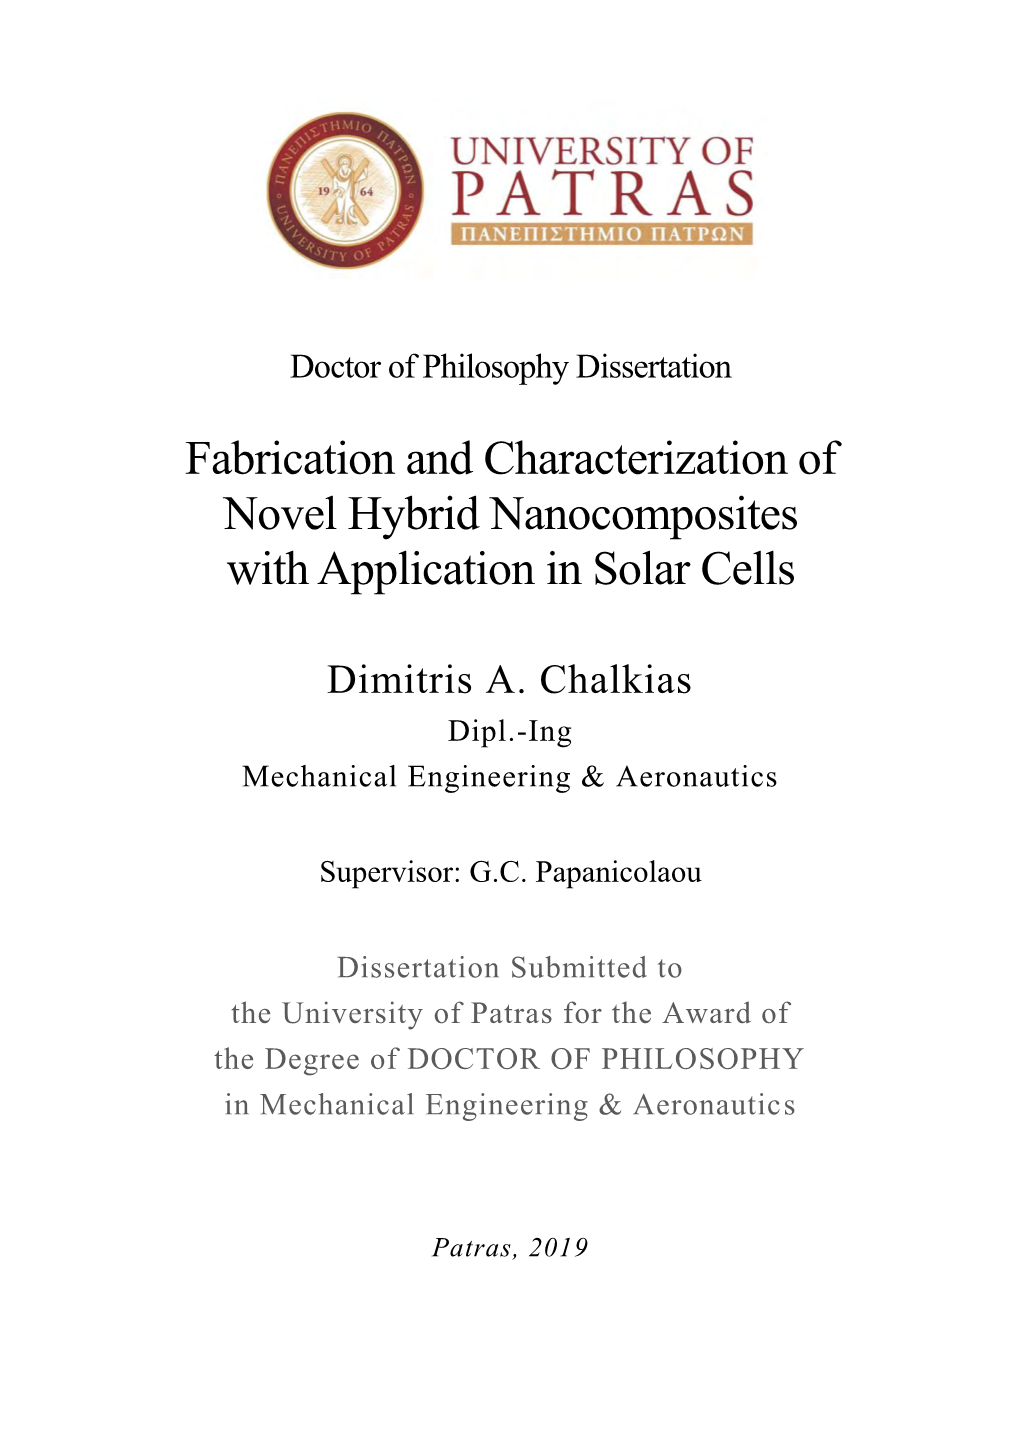 Fabrication and Characterization of Novel Hybrid Nanocomposites with Application in Solar Cells